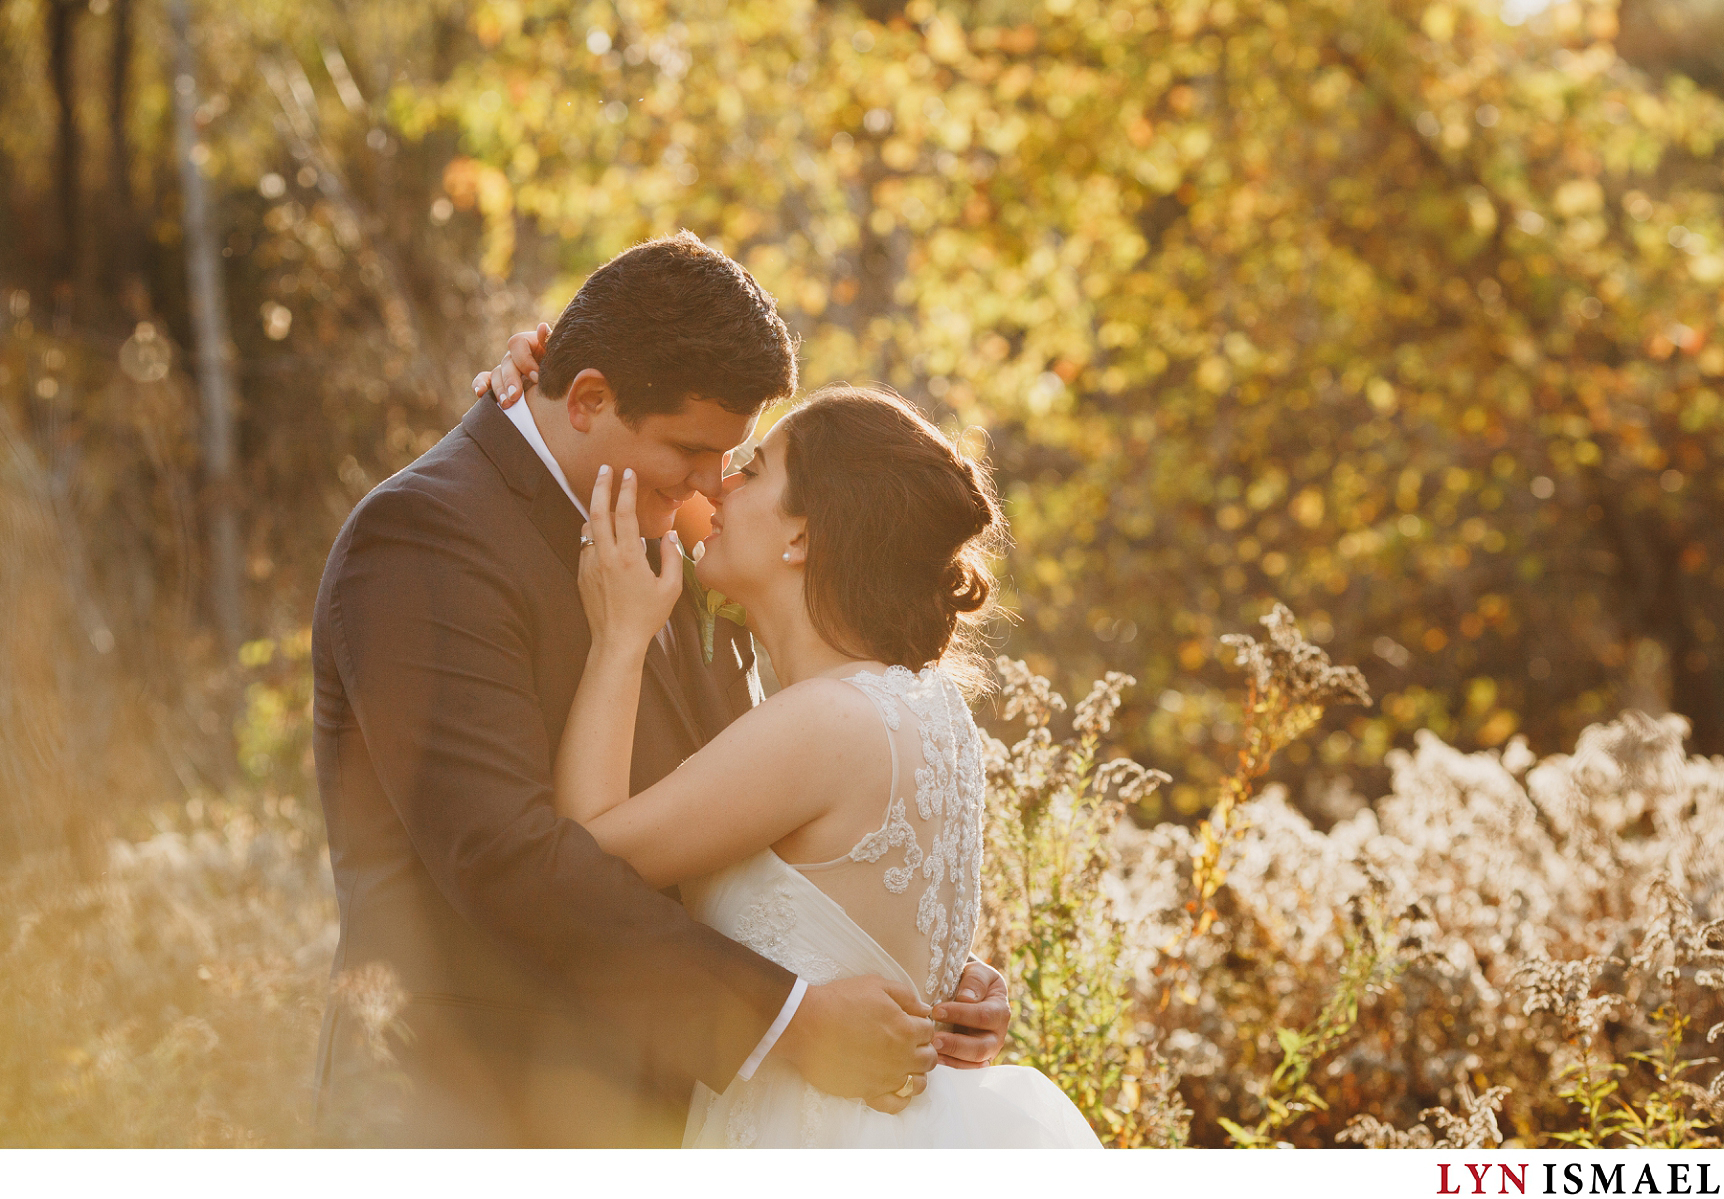 Beautiful light for portraits in Naylon Parkette photographed by a Vaughan wedding photojournalist.